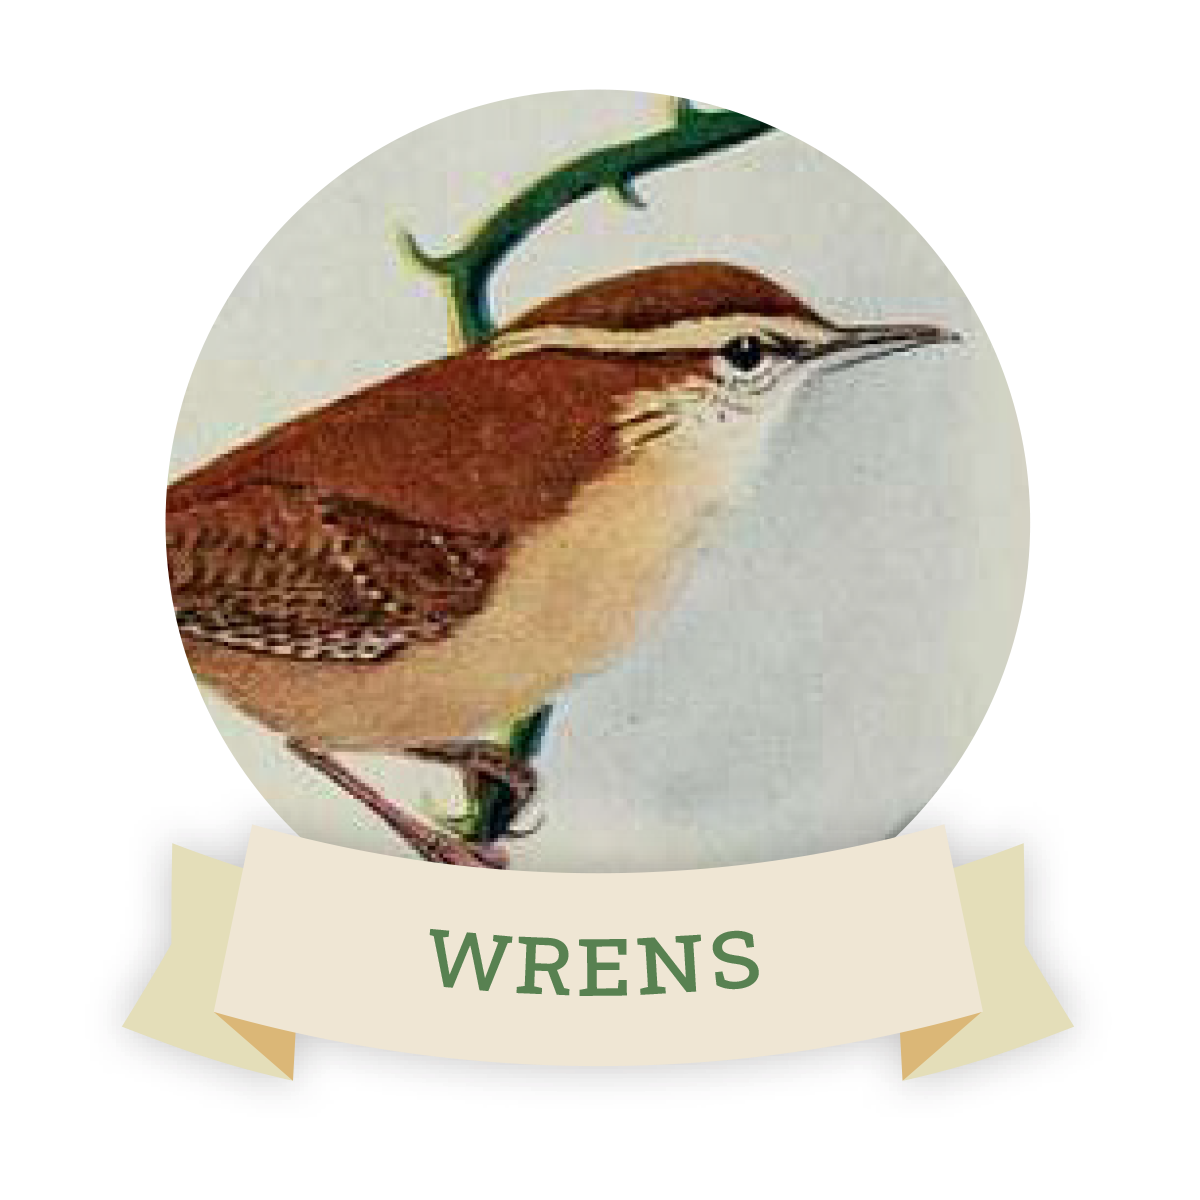 Image of a wren. Links to wren favorite food and feeders.